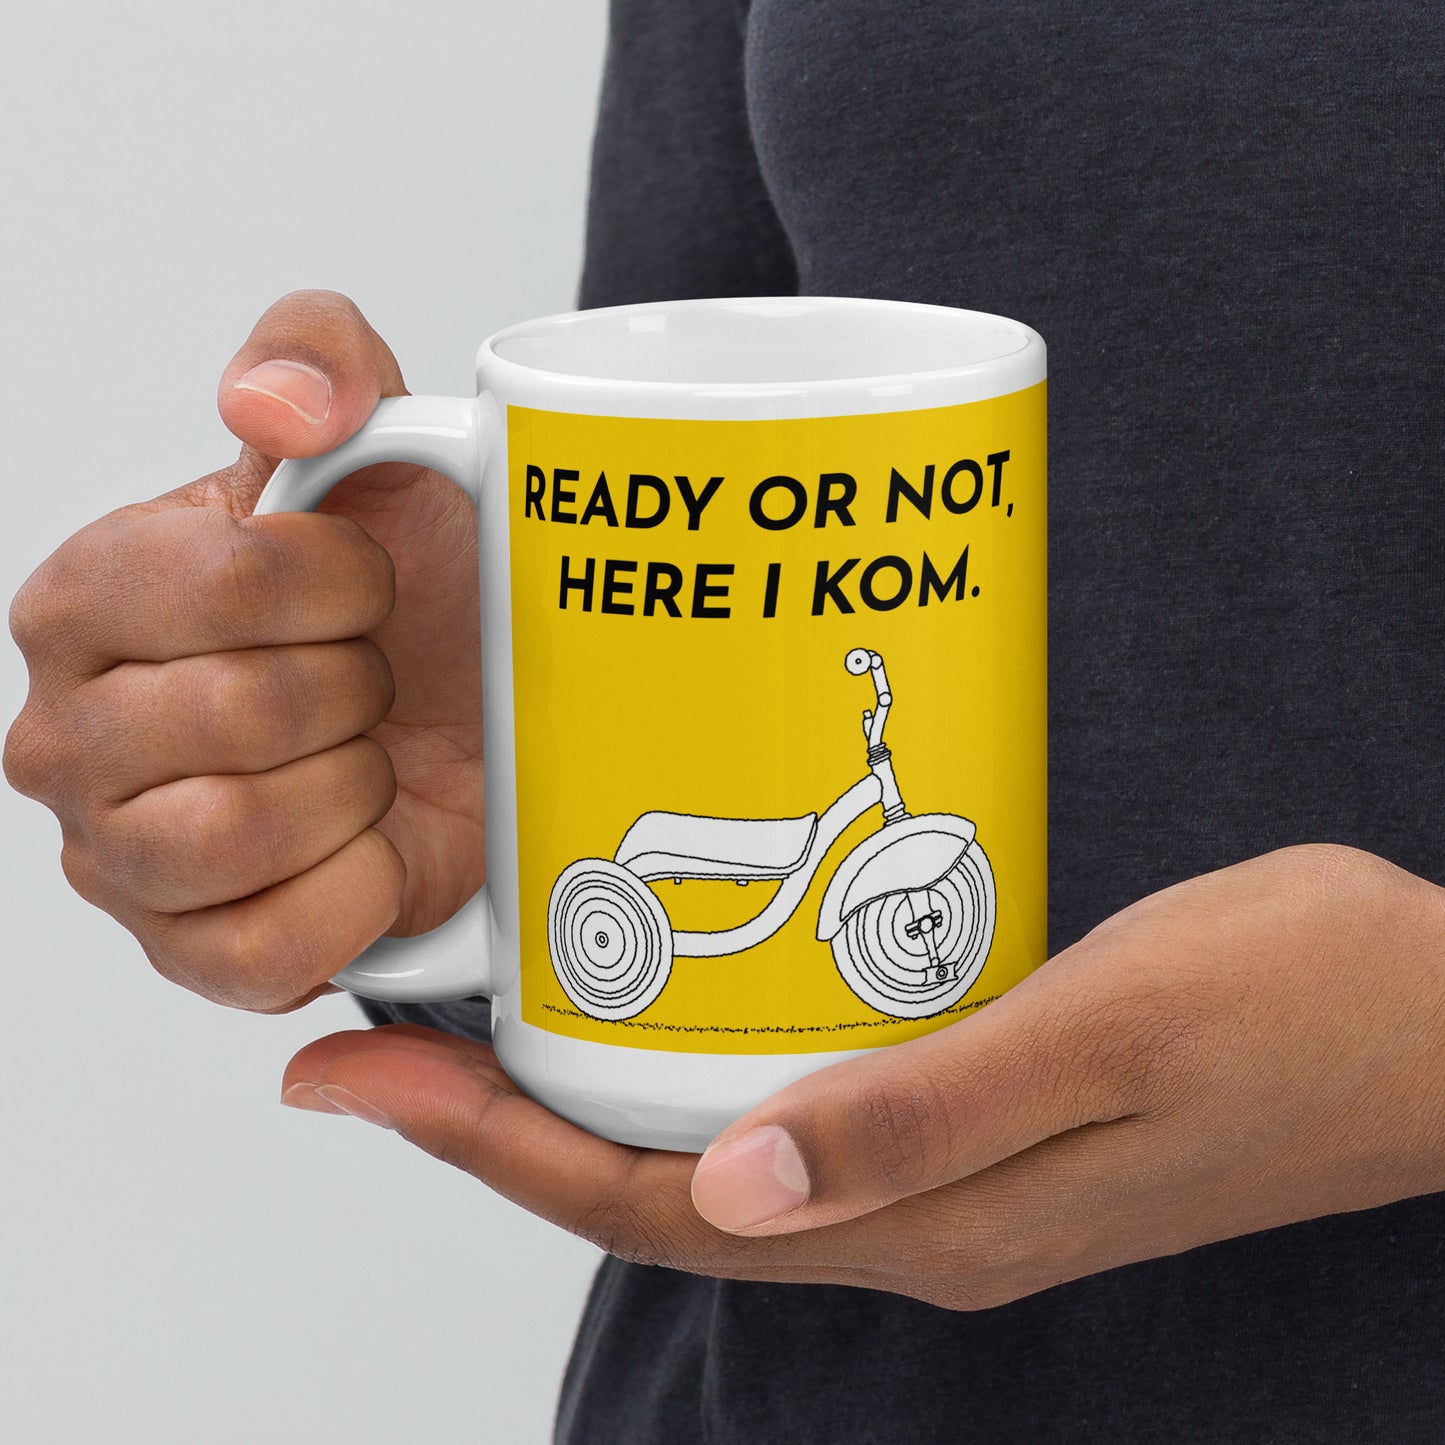 Ready Or Not, Here I KOM, Yellow Tricycle Mug M080